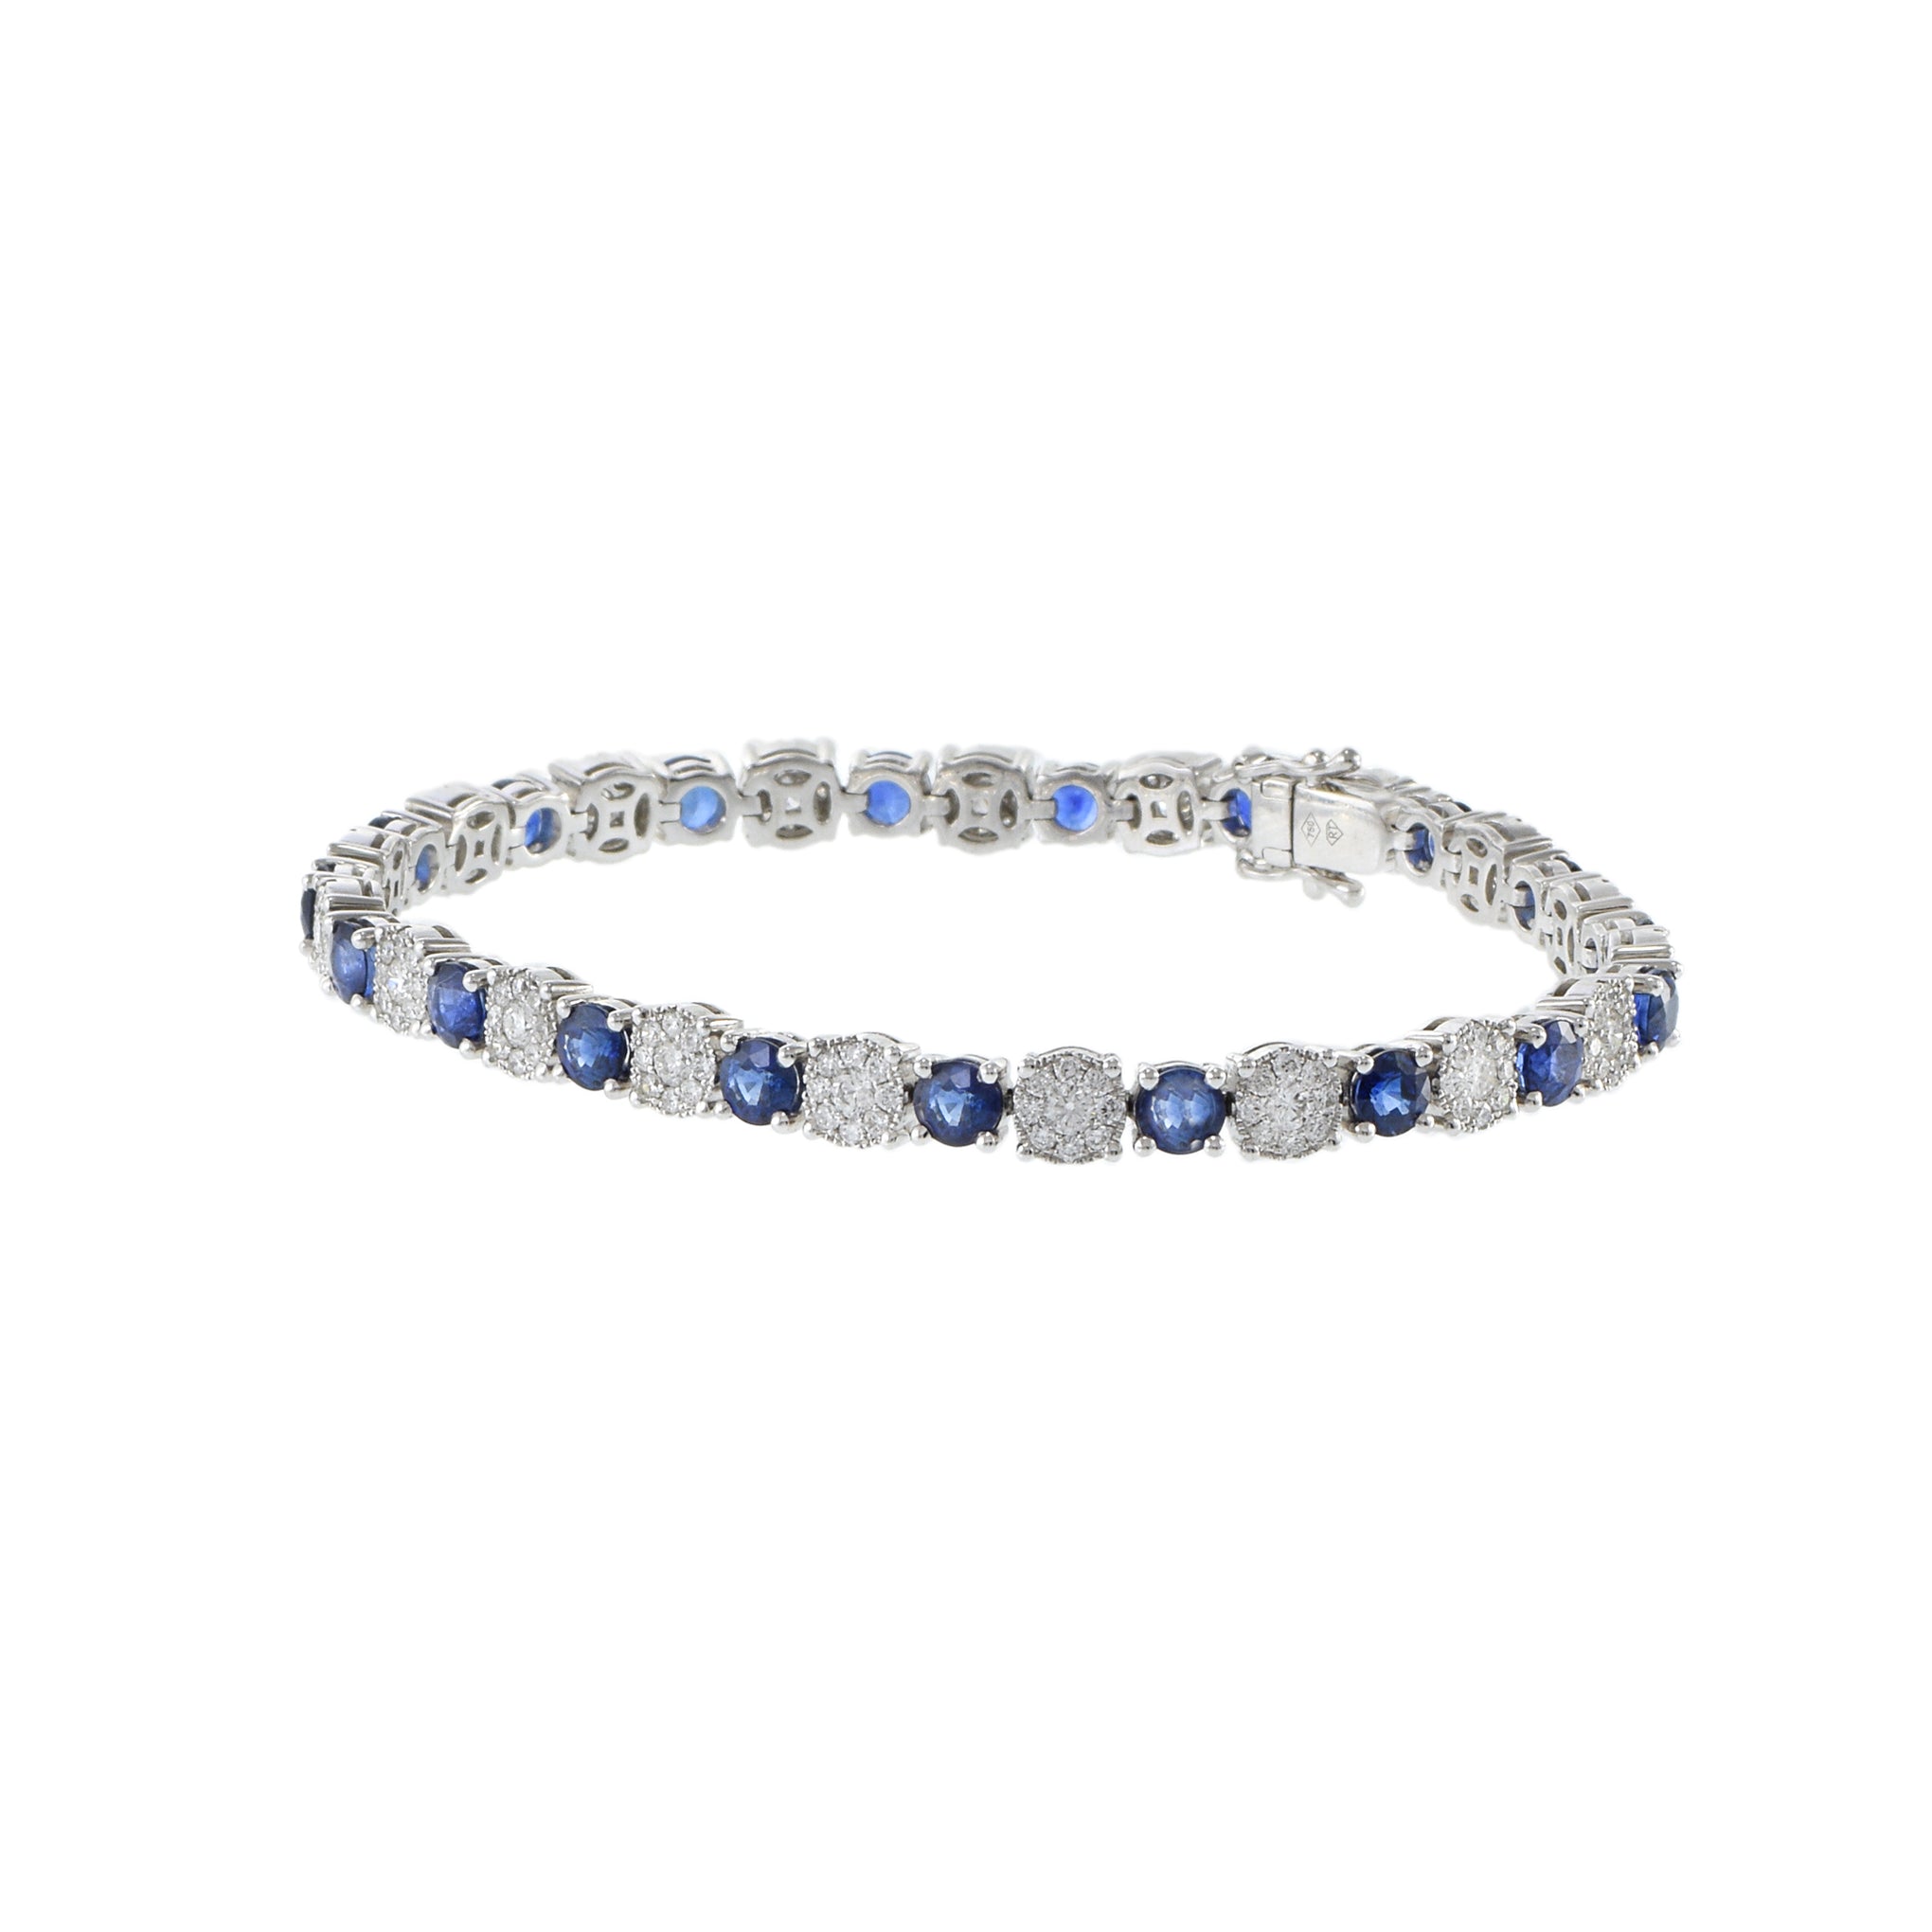 18KT White Gold Round Cut Sapphire And Cluster Diamond Bracelet